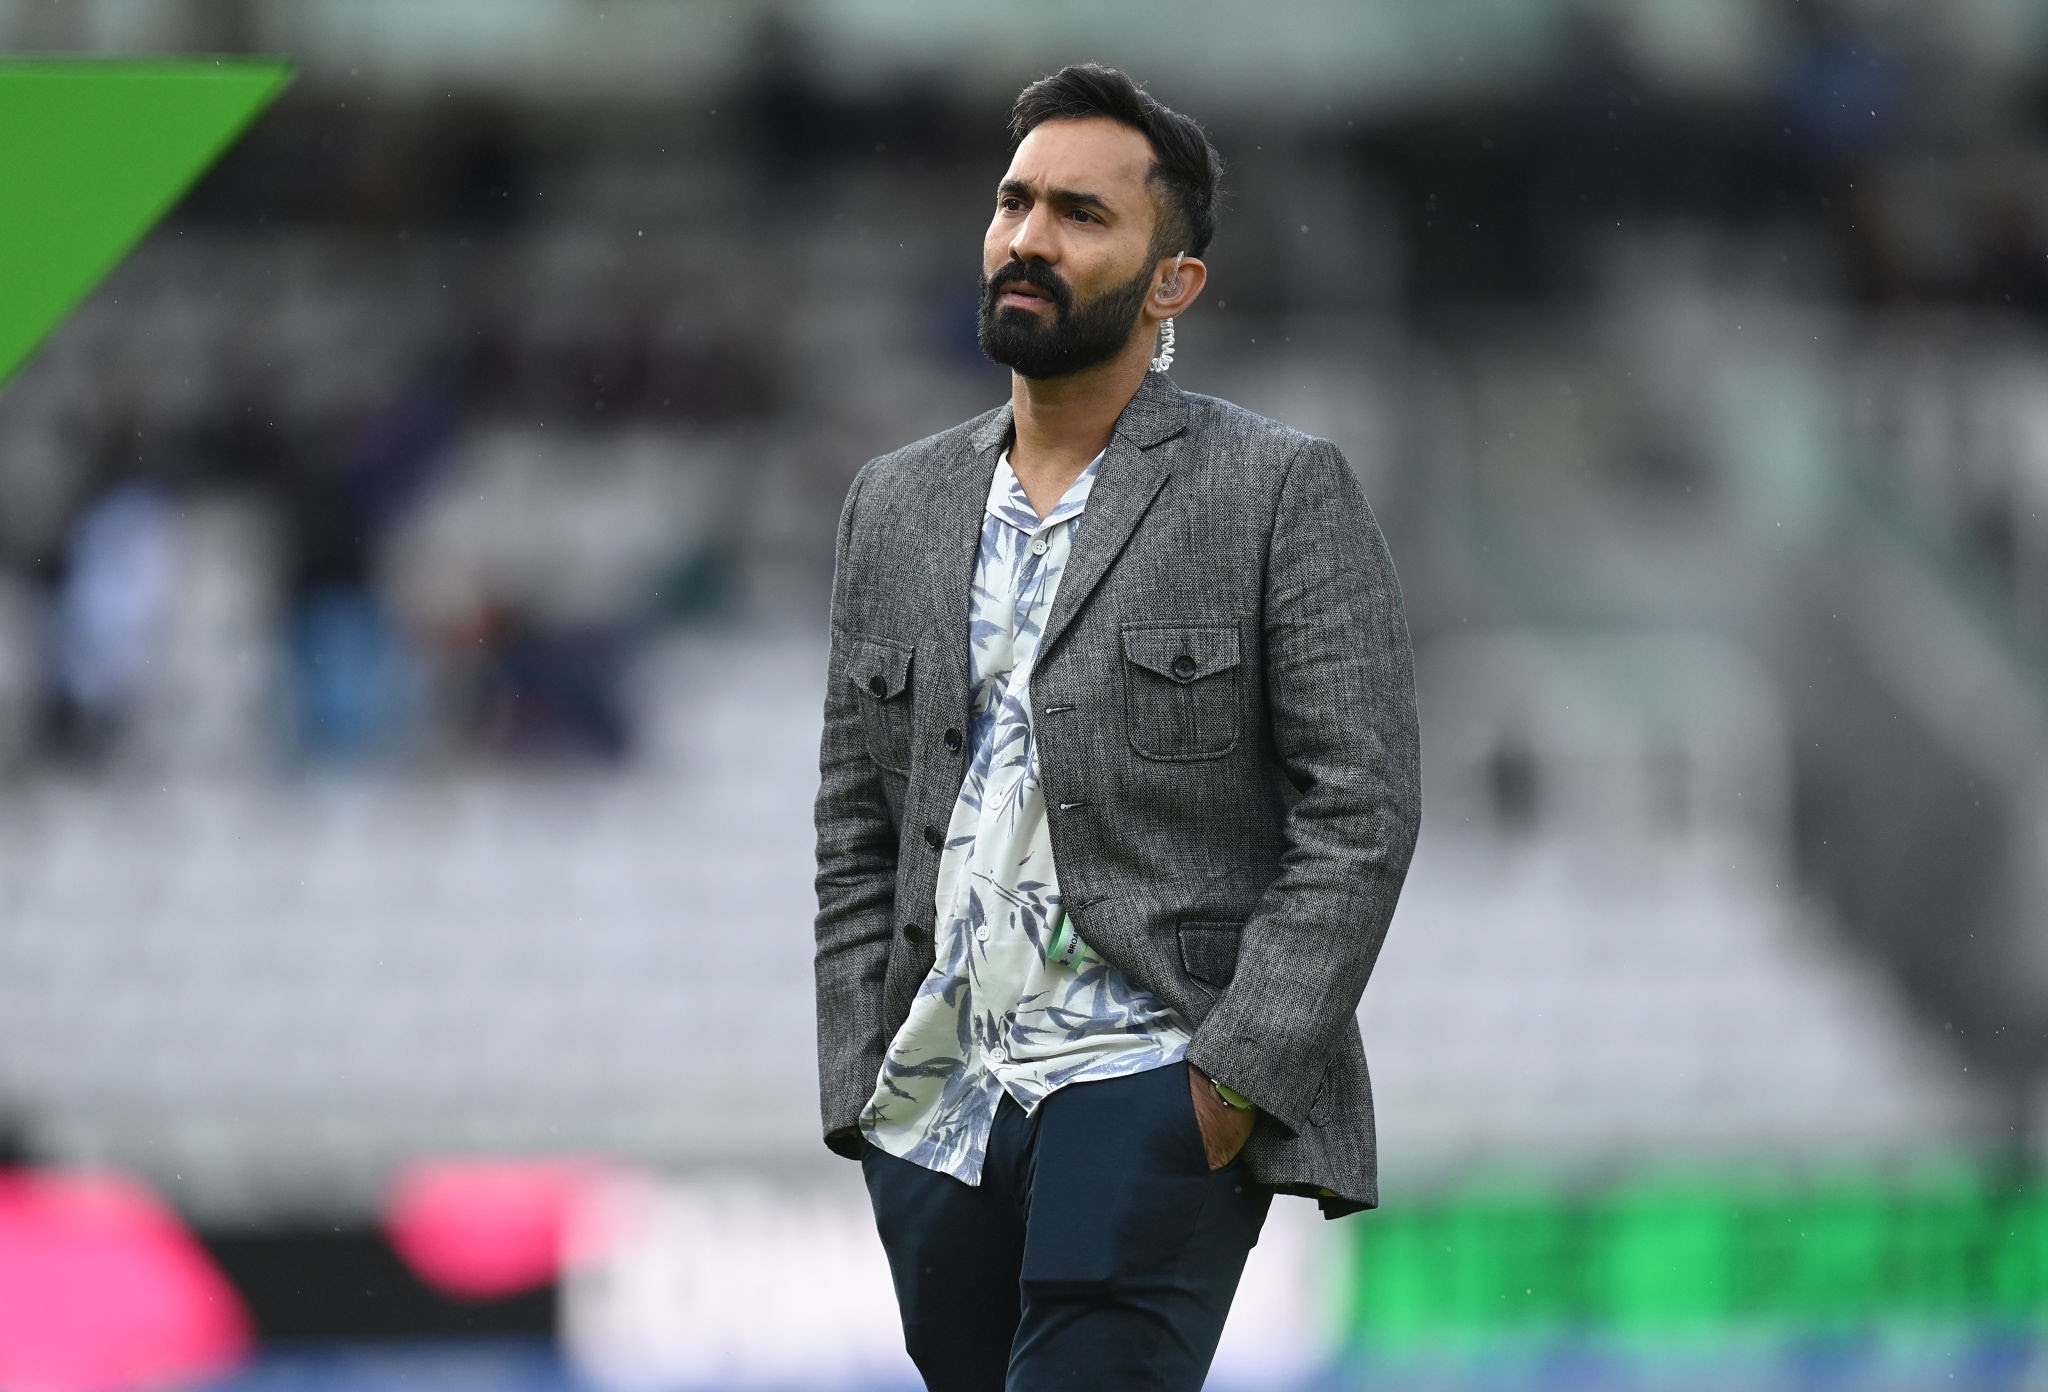 IND vs ENG: His Career For The Moment Could Be On The Line - Dinesh Karthik On Shubman Gill's Reluctant Approach Against England 1